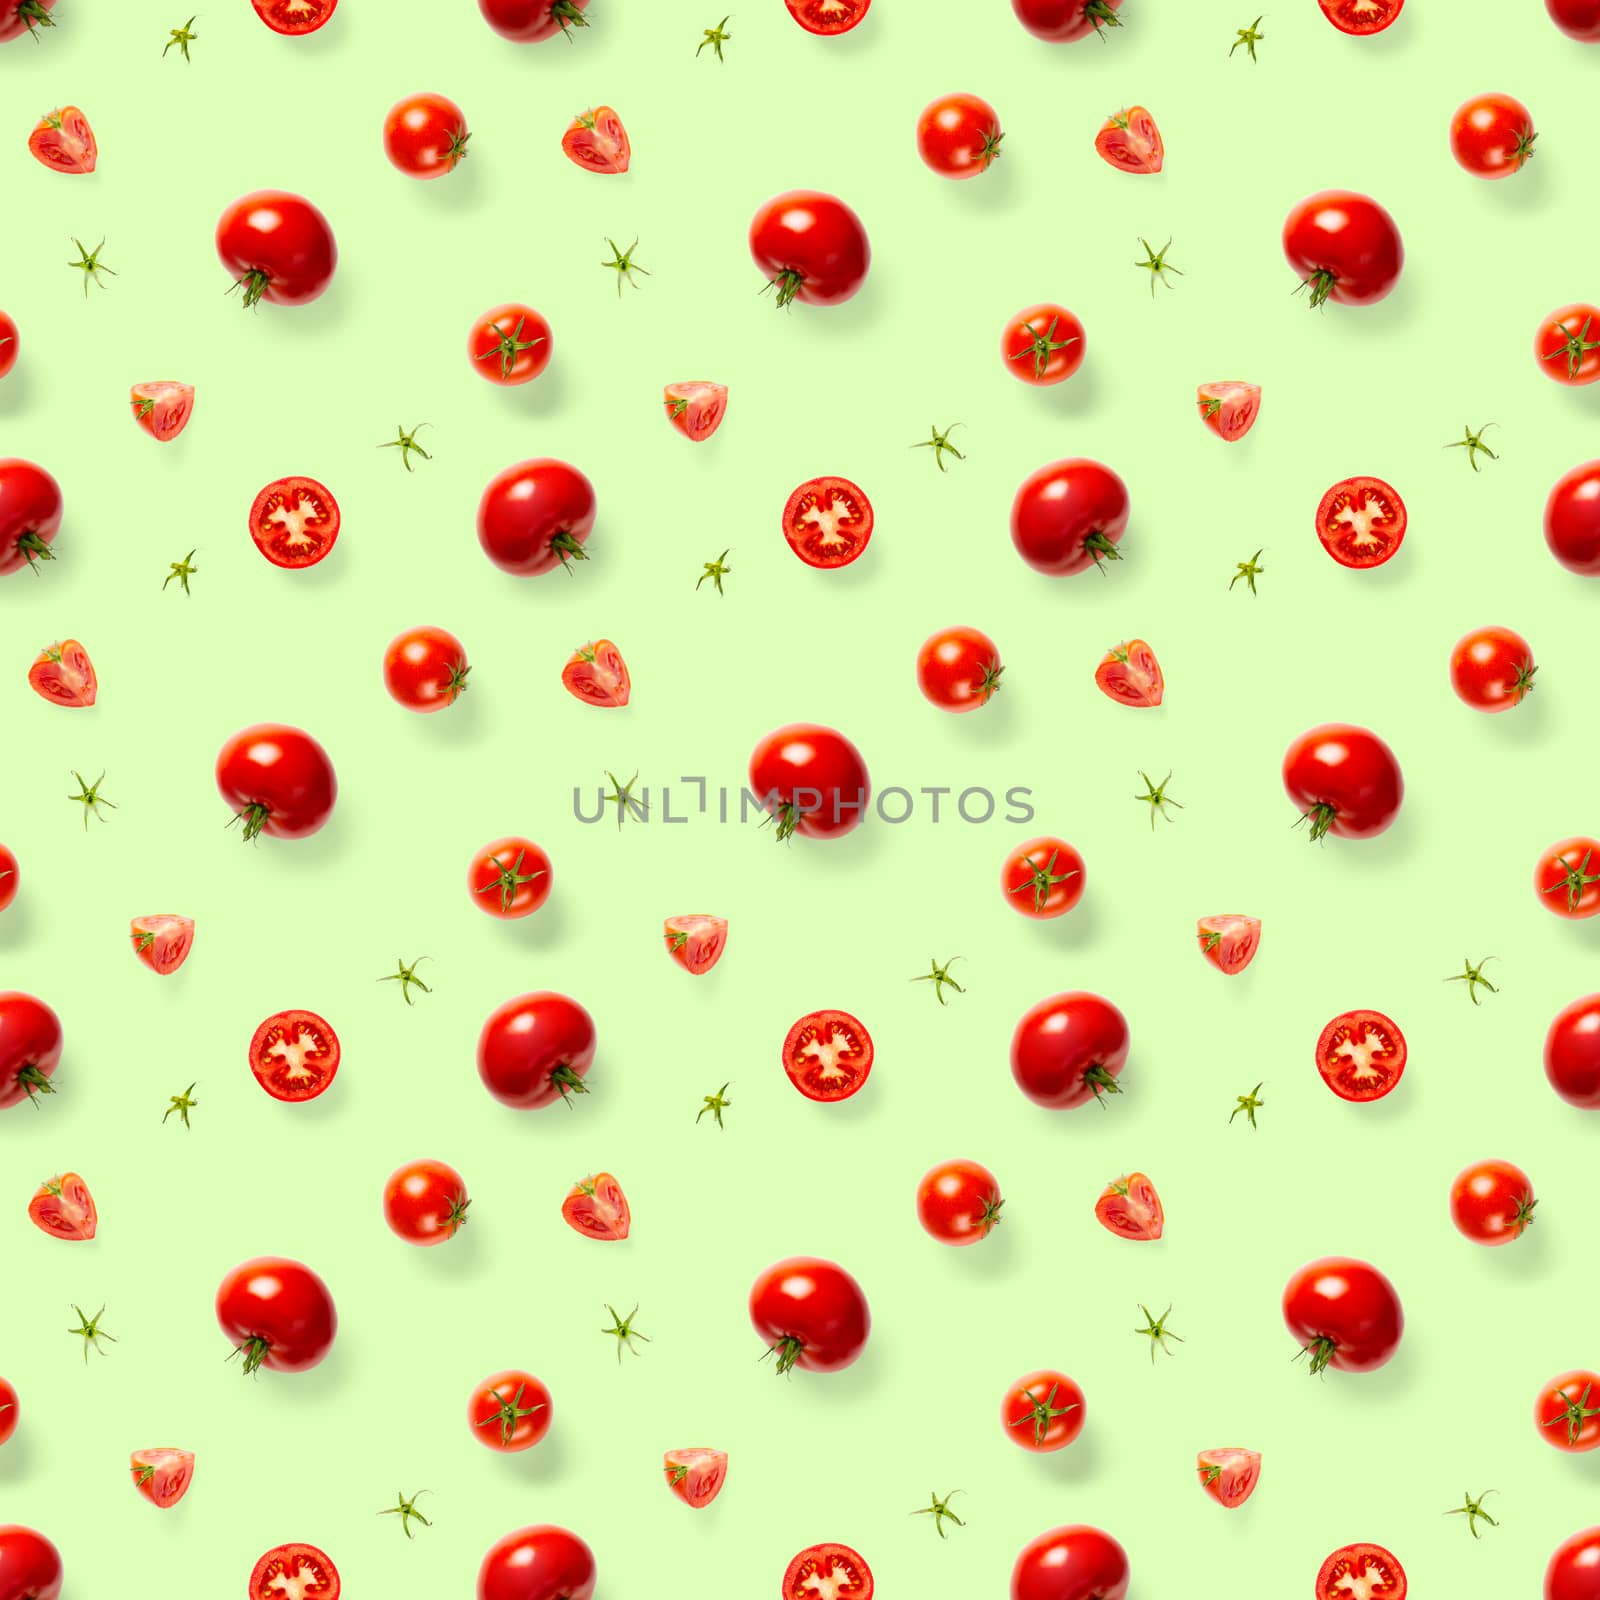 Seamless pattern with red ripe tomatoes. Tomato isolated on green background. Vegetable abstract seamless pattern. Organic Tomatoes flat lay.